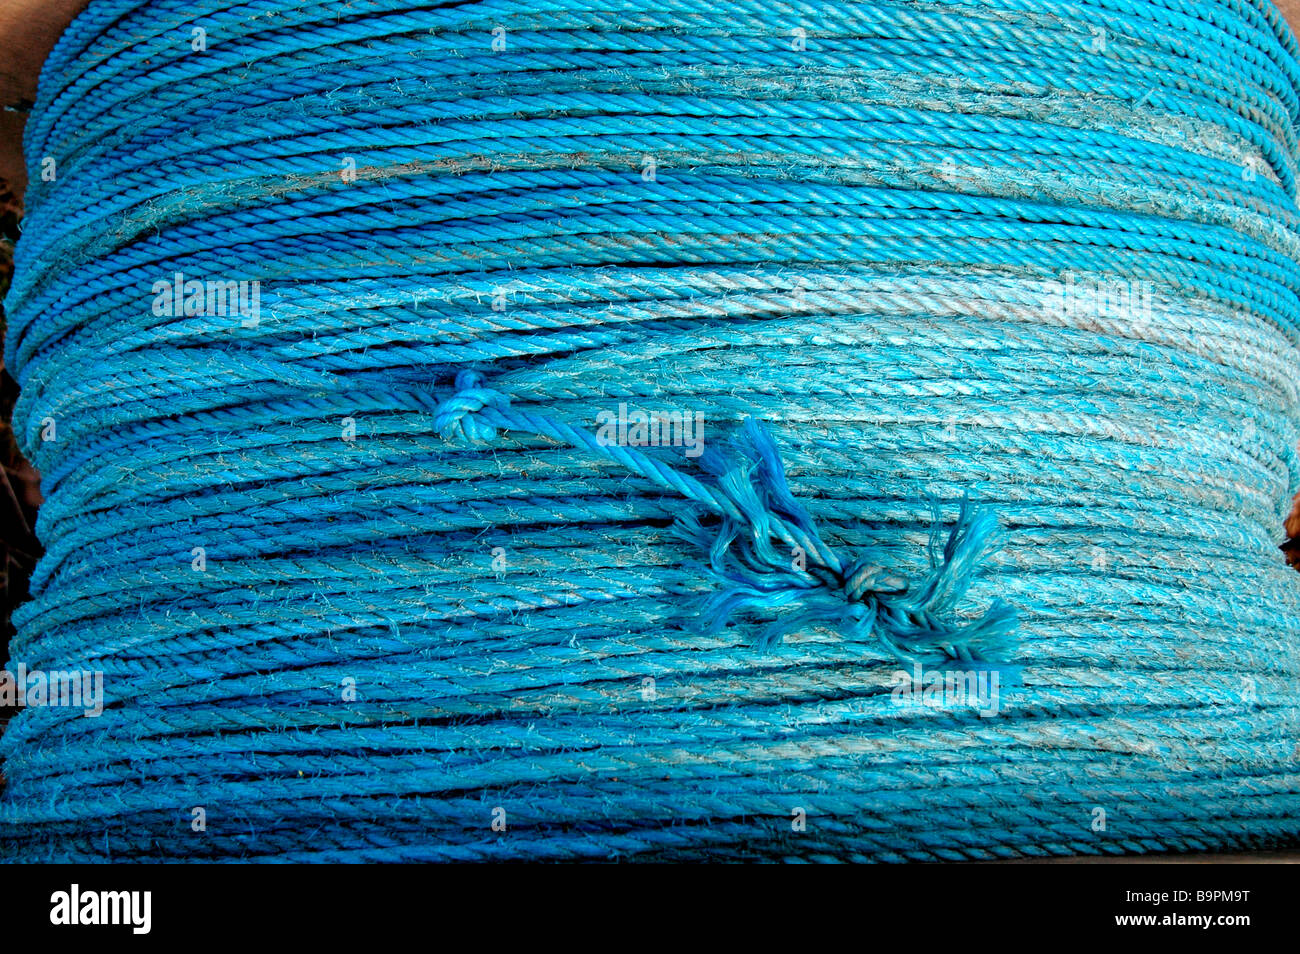 Coils of colorful rope in display at Home Depot, USA Stock Photo - Alamy